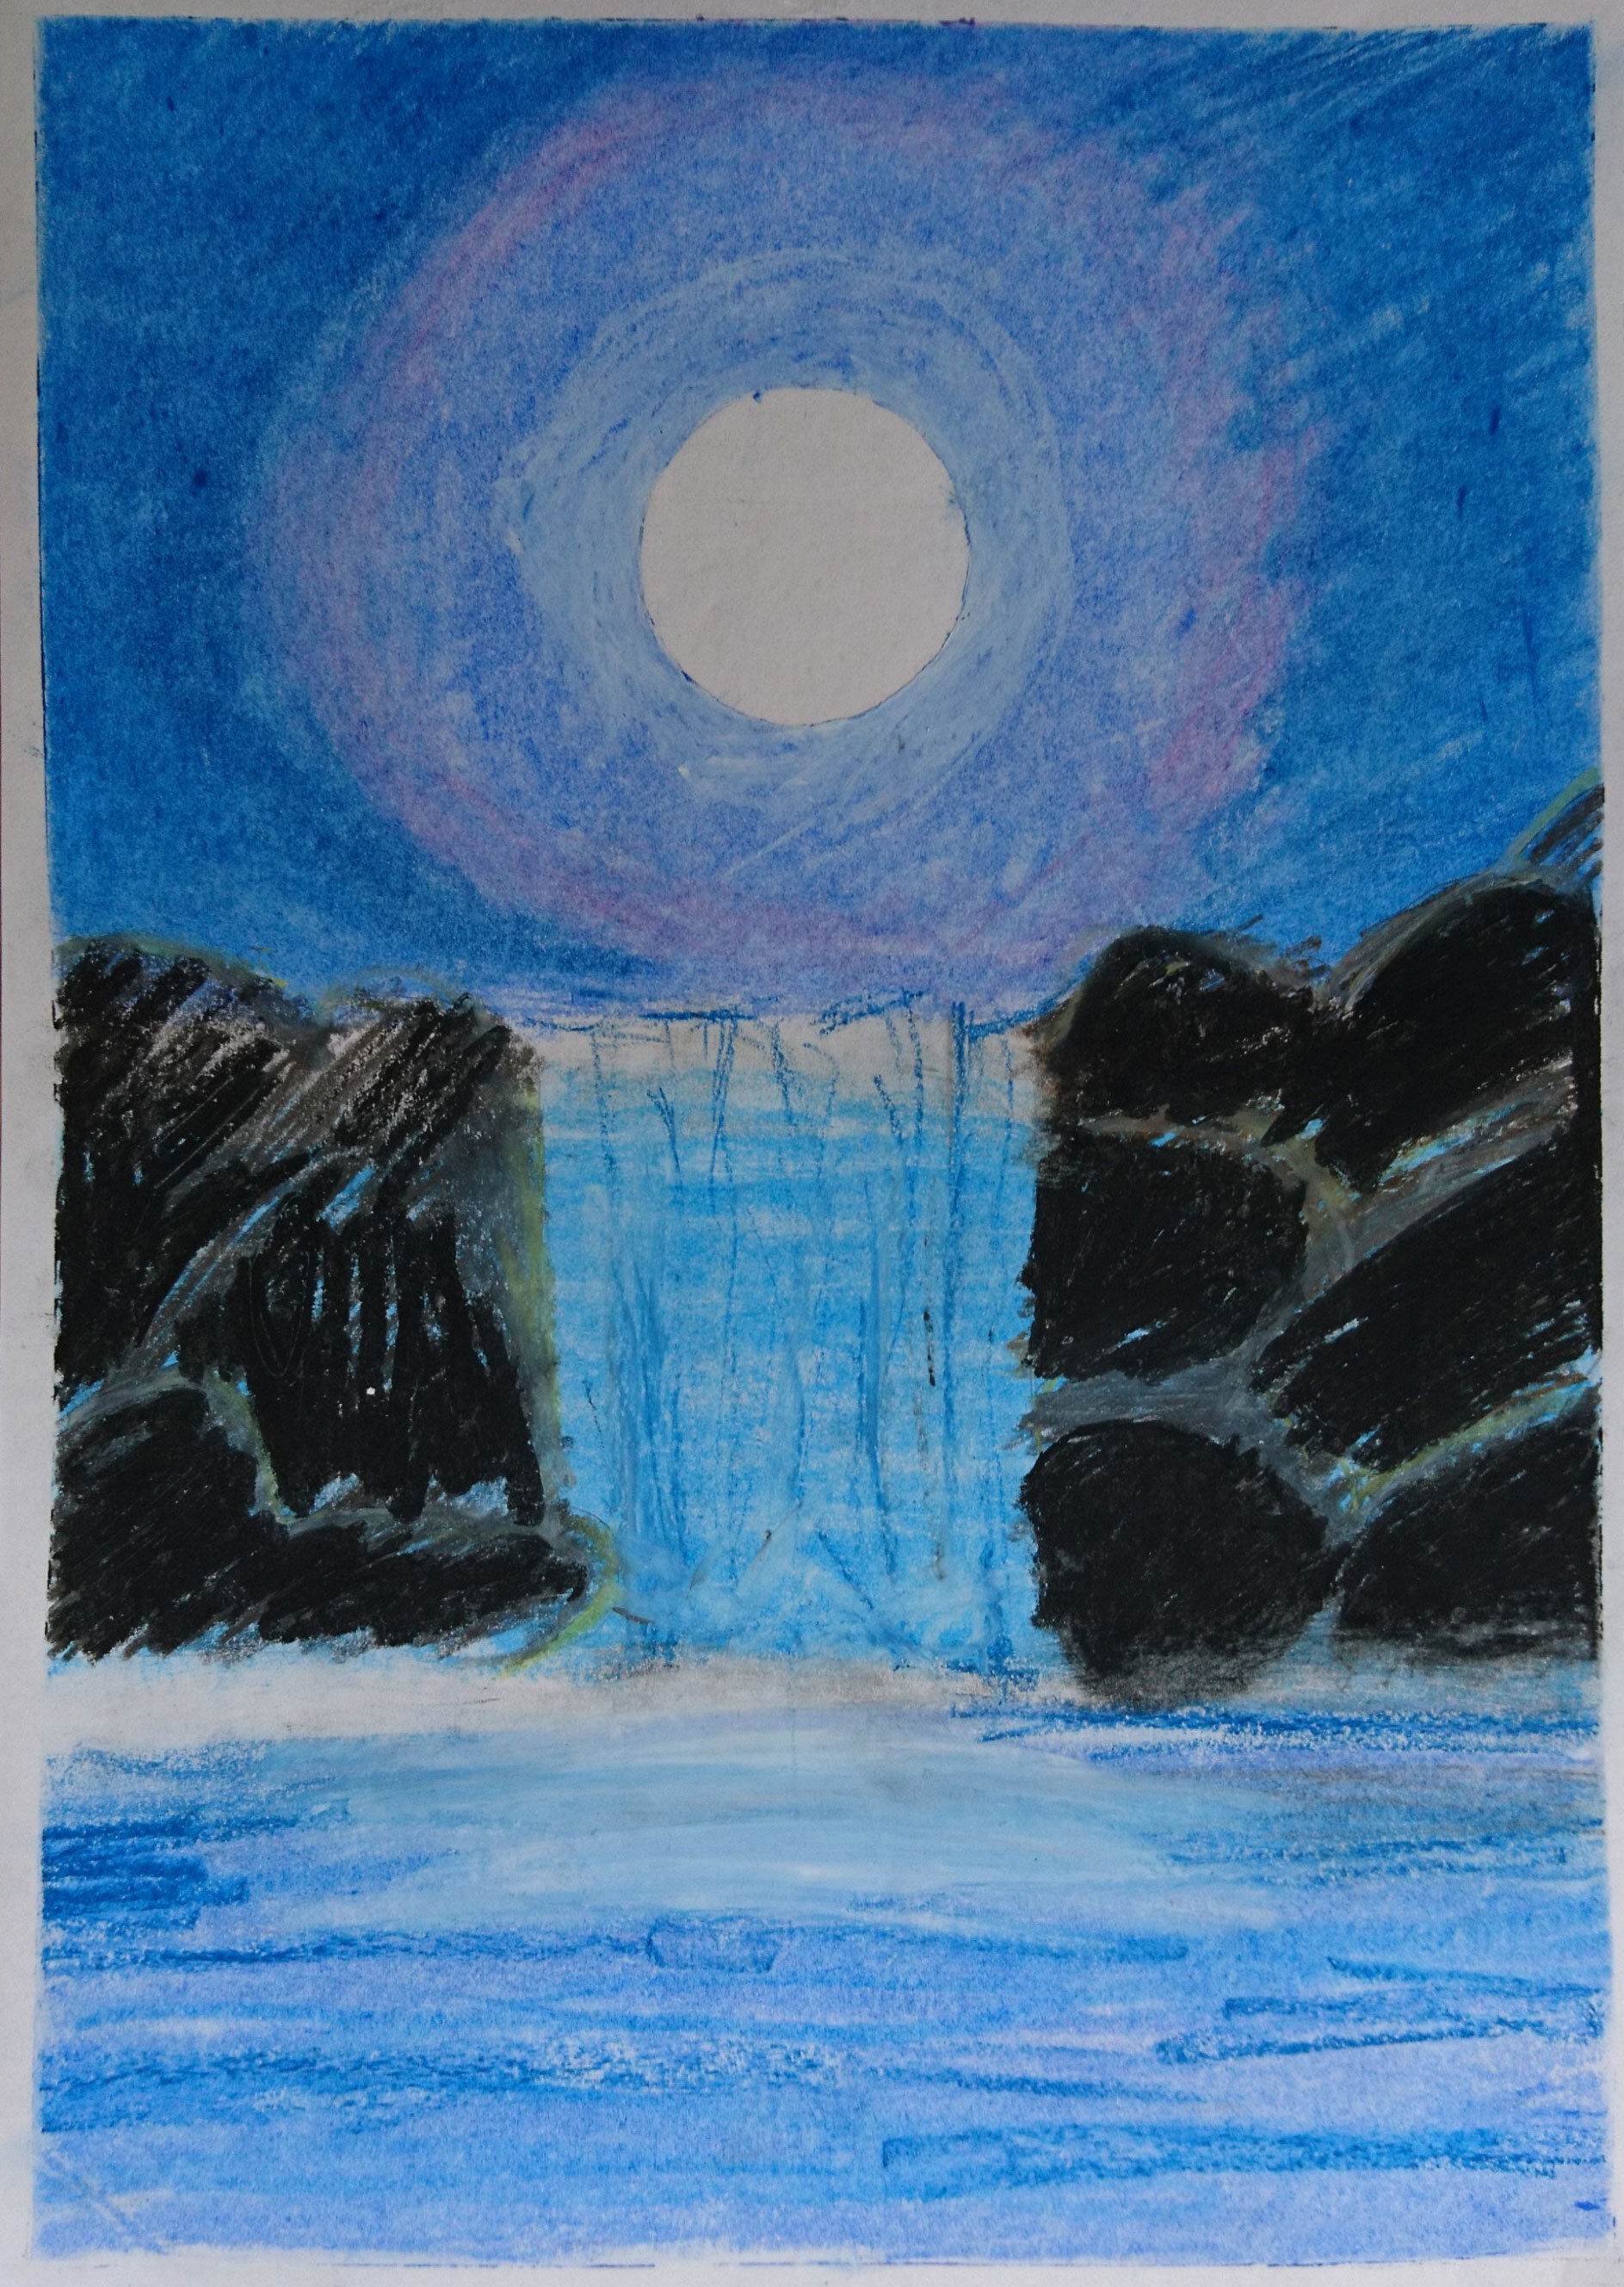 Waterfall by Archie Rendall age 9